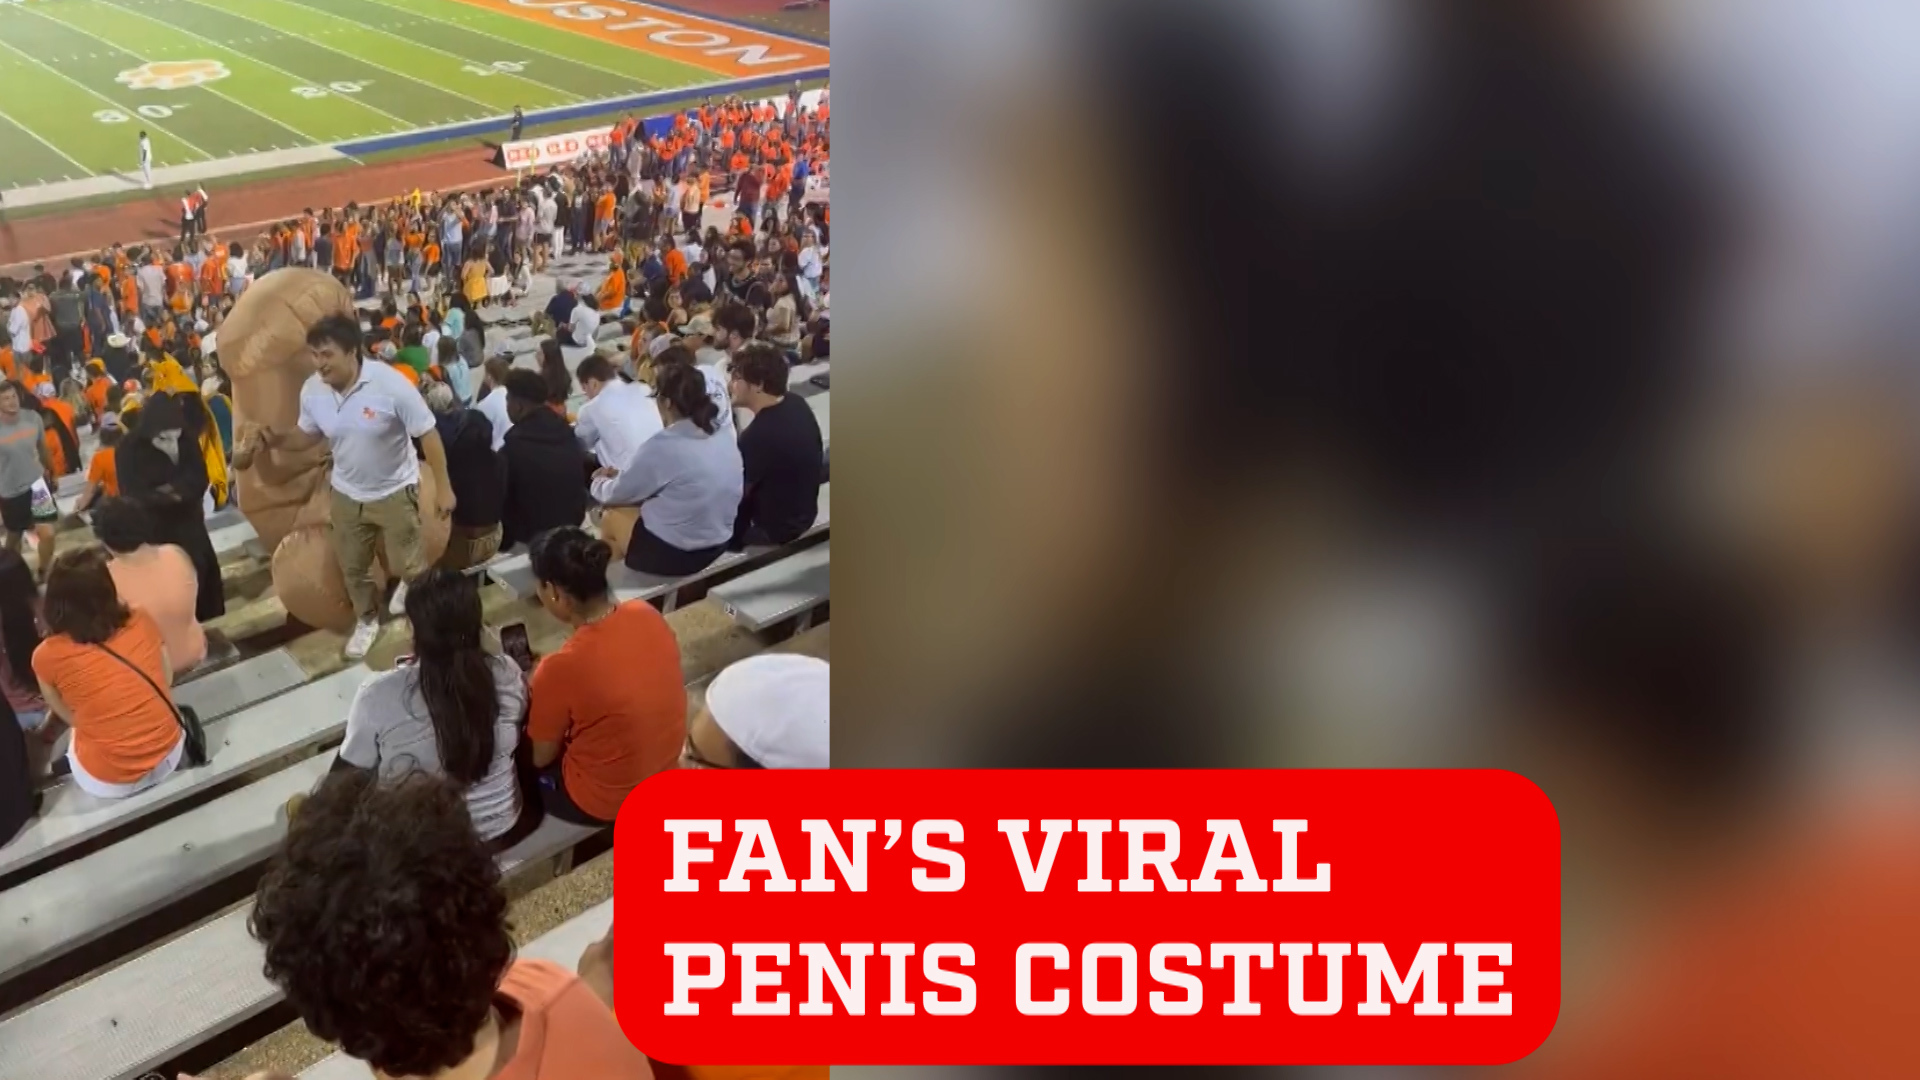 Fan wears giant penis costume to college football game and is quickly ejected: "He got too cocky"